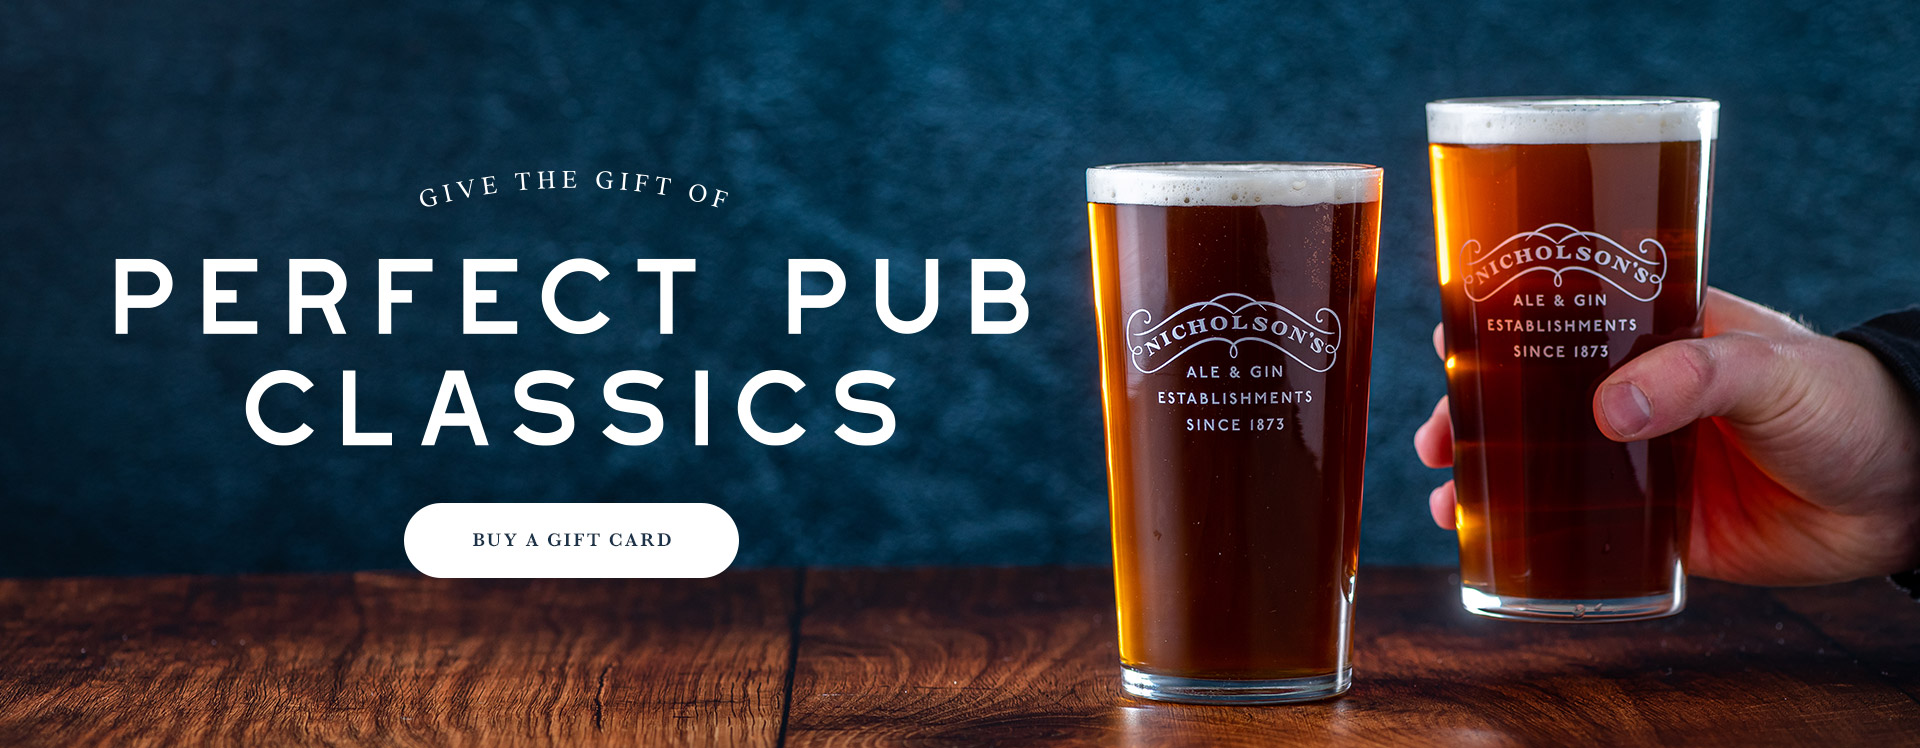 Nicholson’s Pub Gift Voucher at The King's Head in London